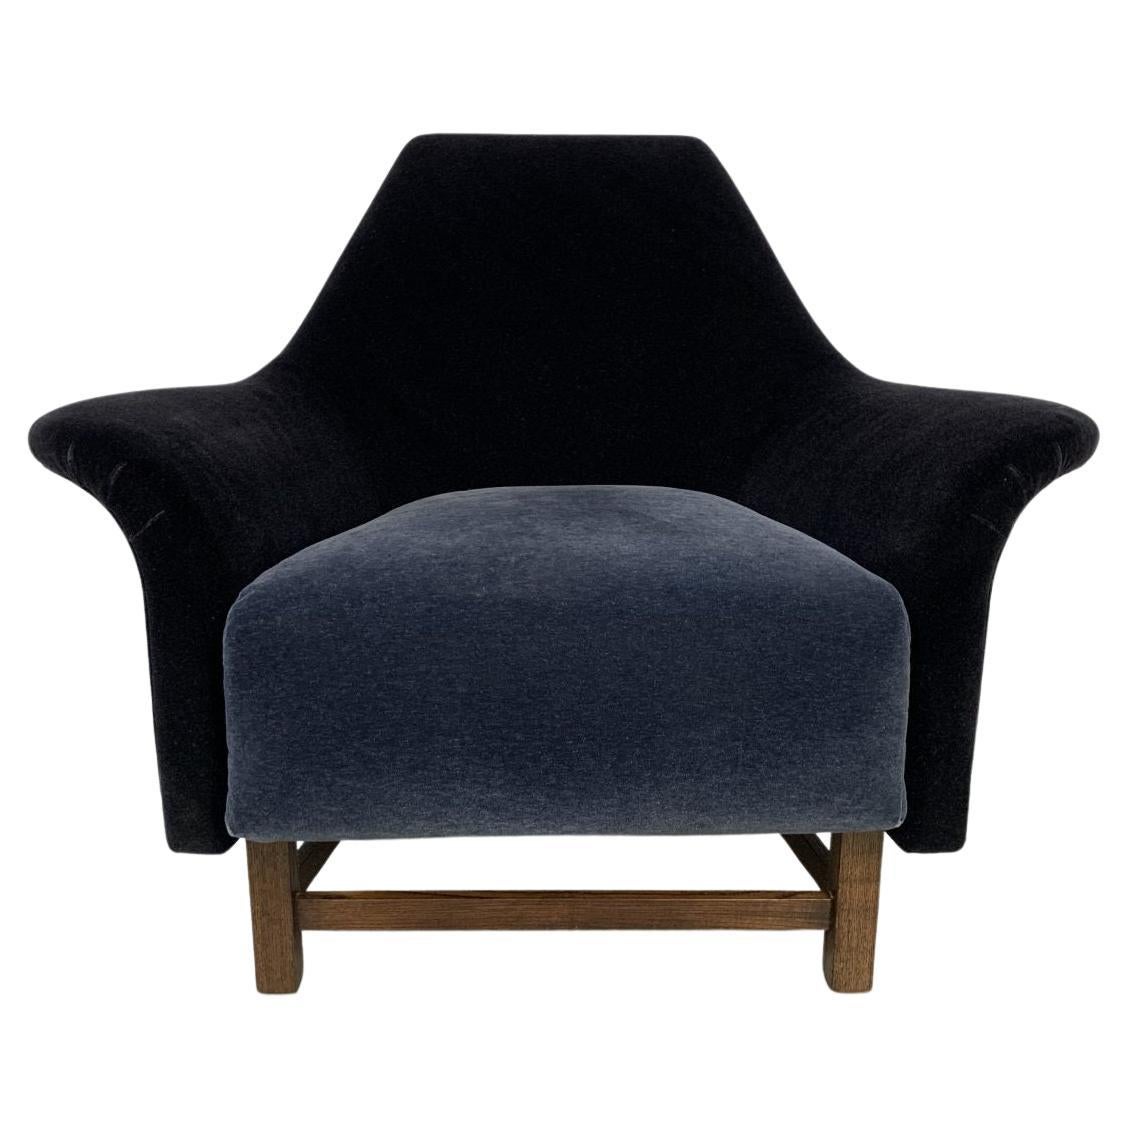 George Smith “Justice”Armchair by Tom Dixon in Black & Baltic Blue Mohair Velvet